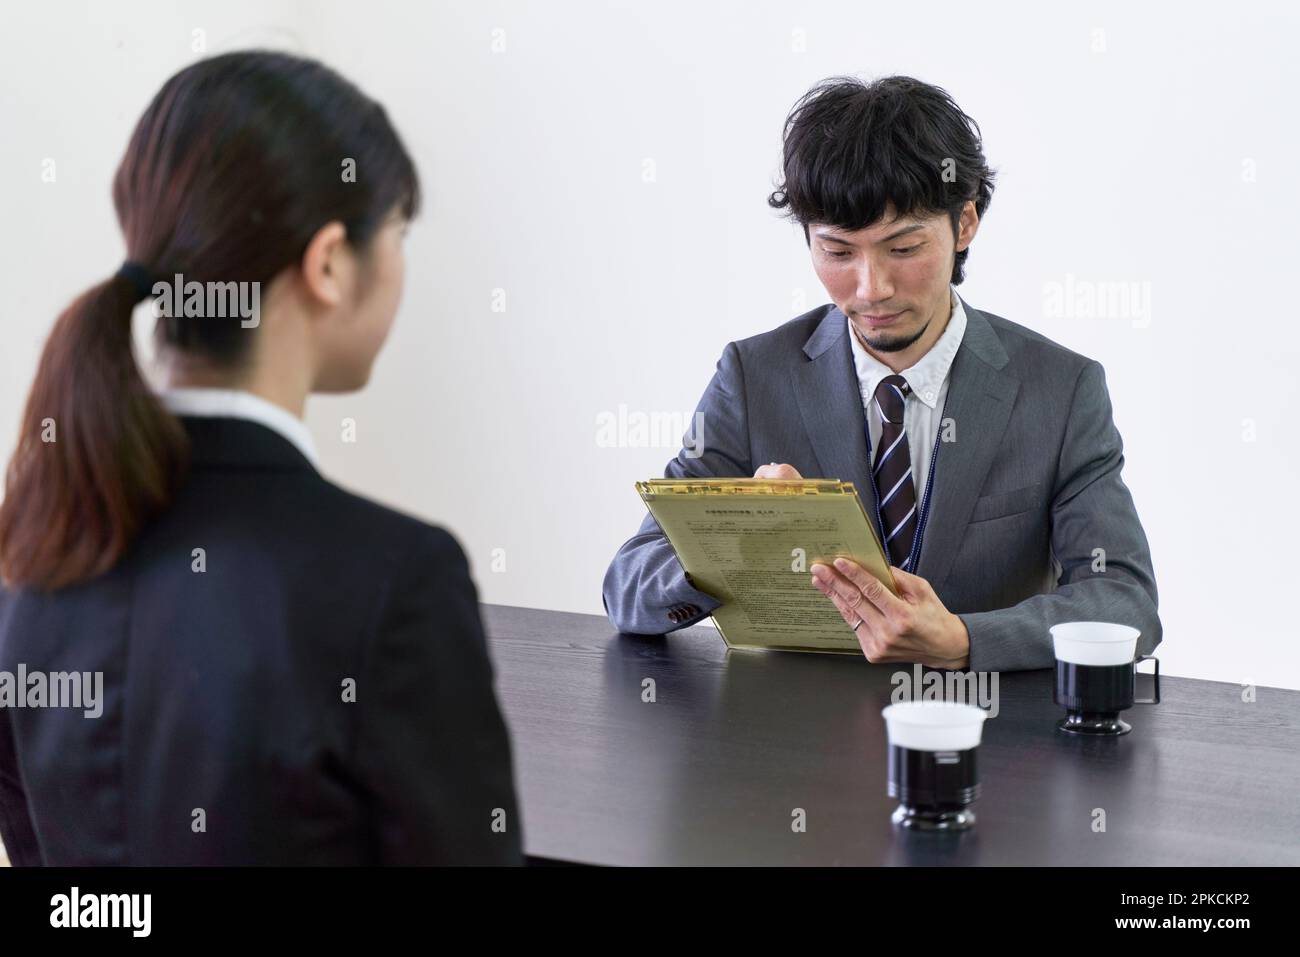 A male interviewer interviewing a female job hunter and writing down information on a document. Stock Photo